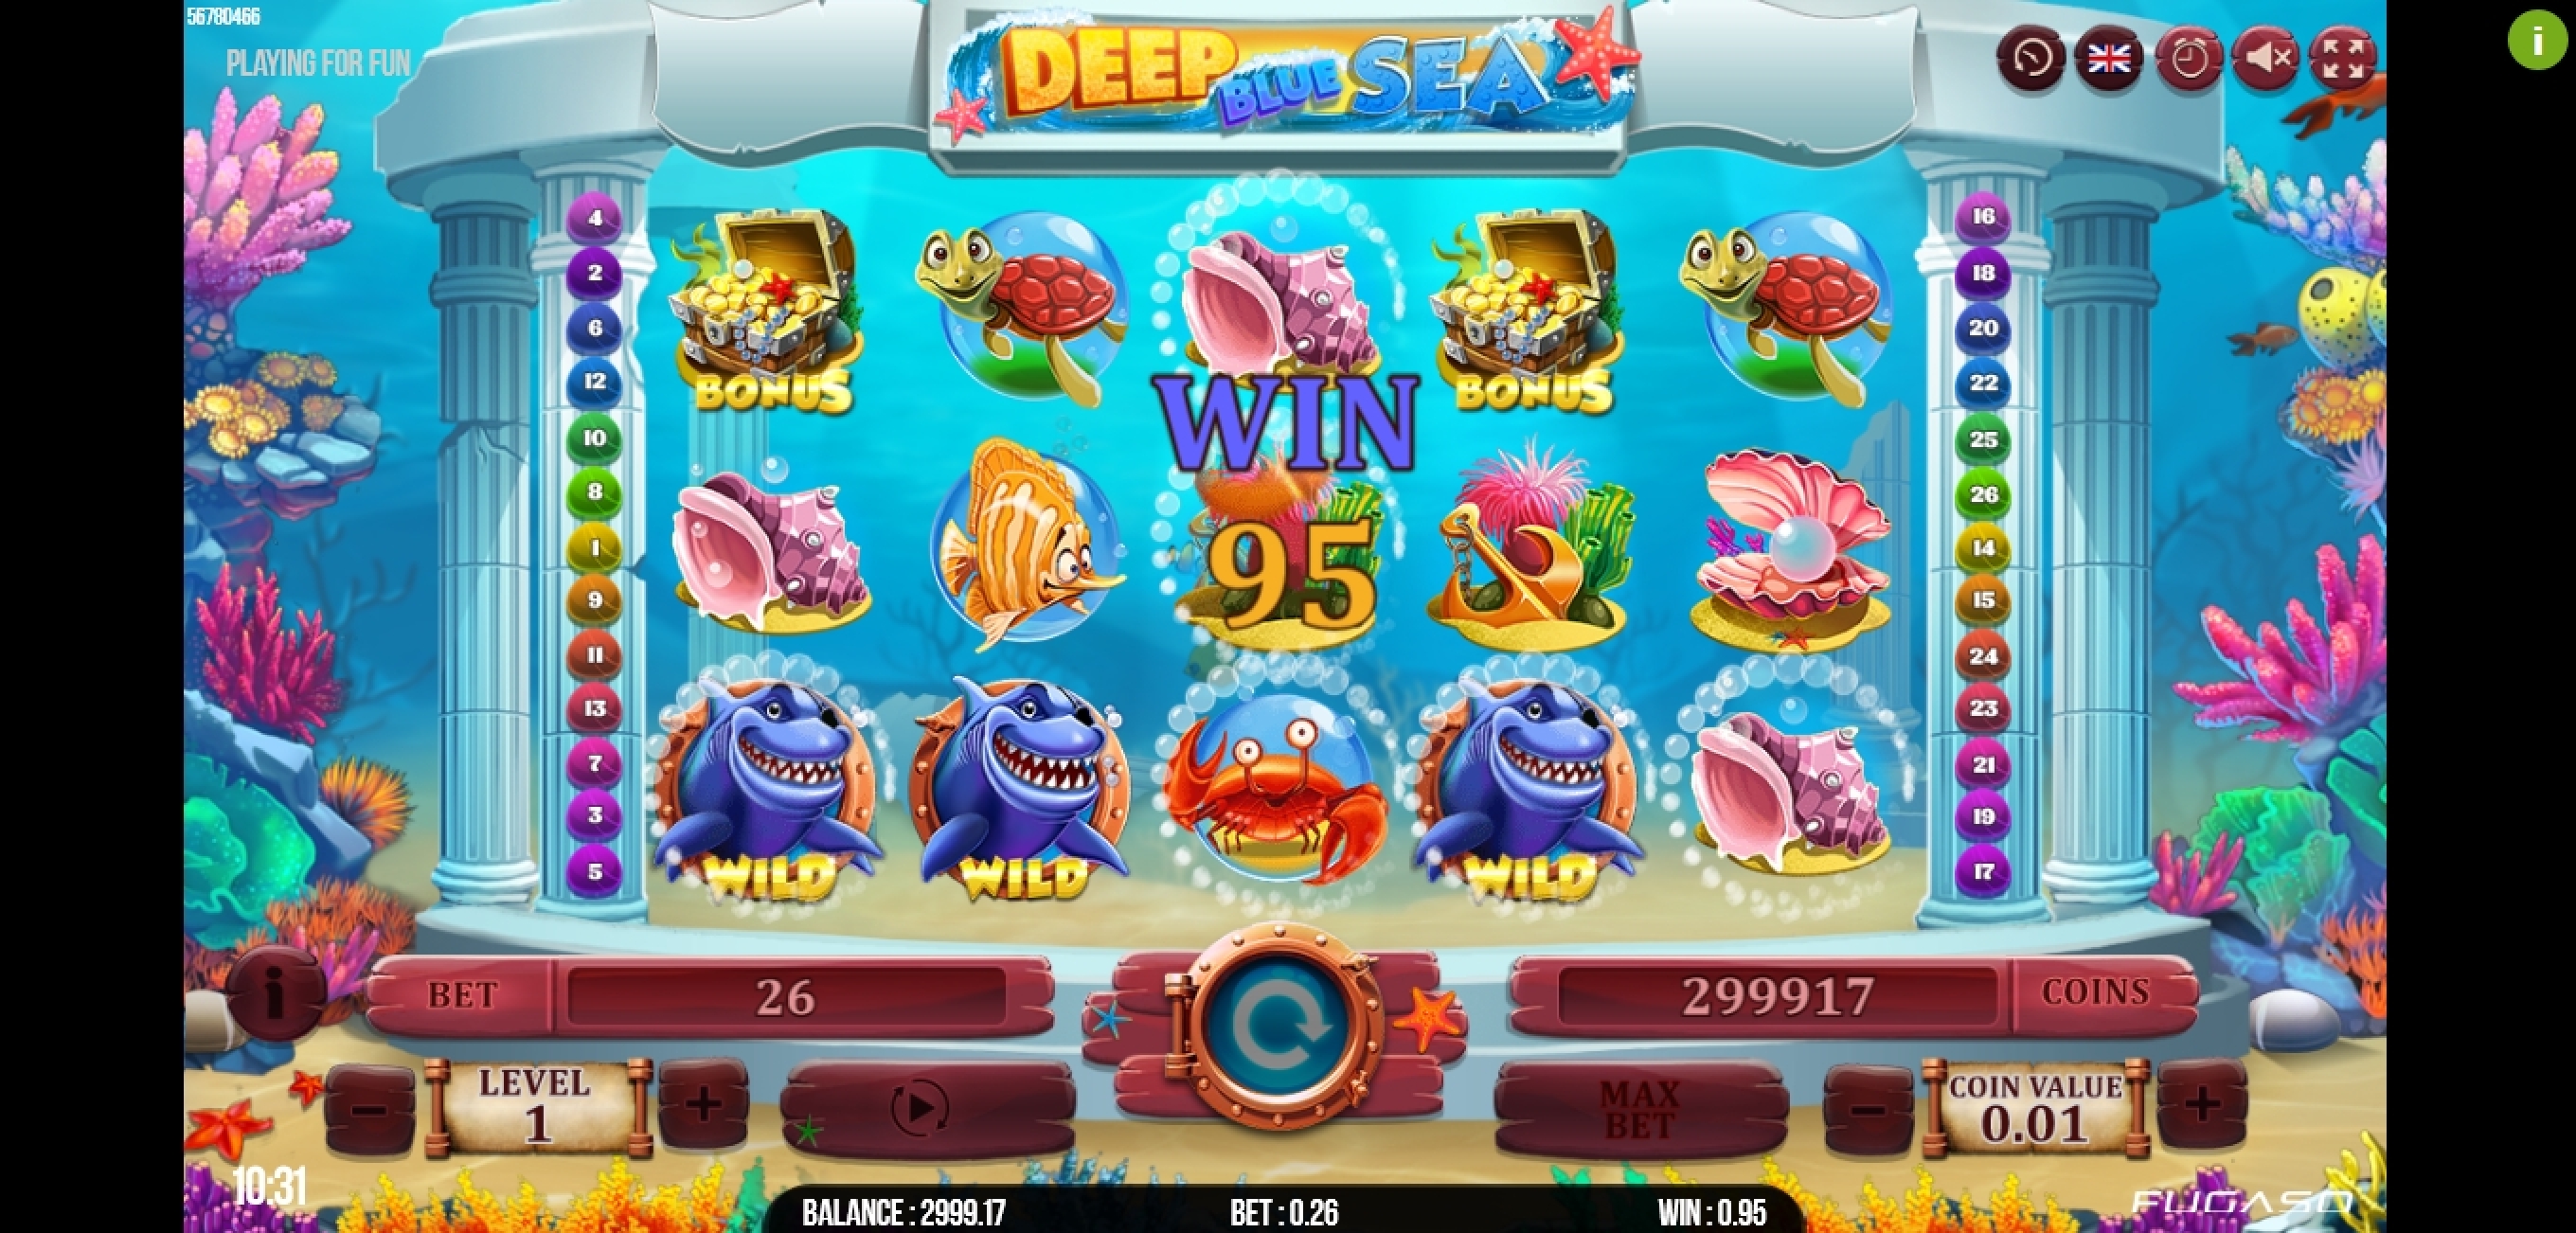 Win Money in Deep Blue Sea Free Slot Game by Fugaso